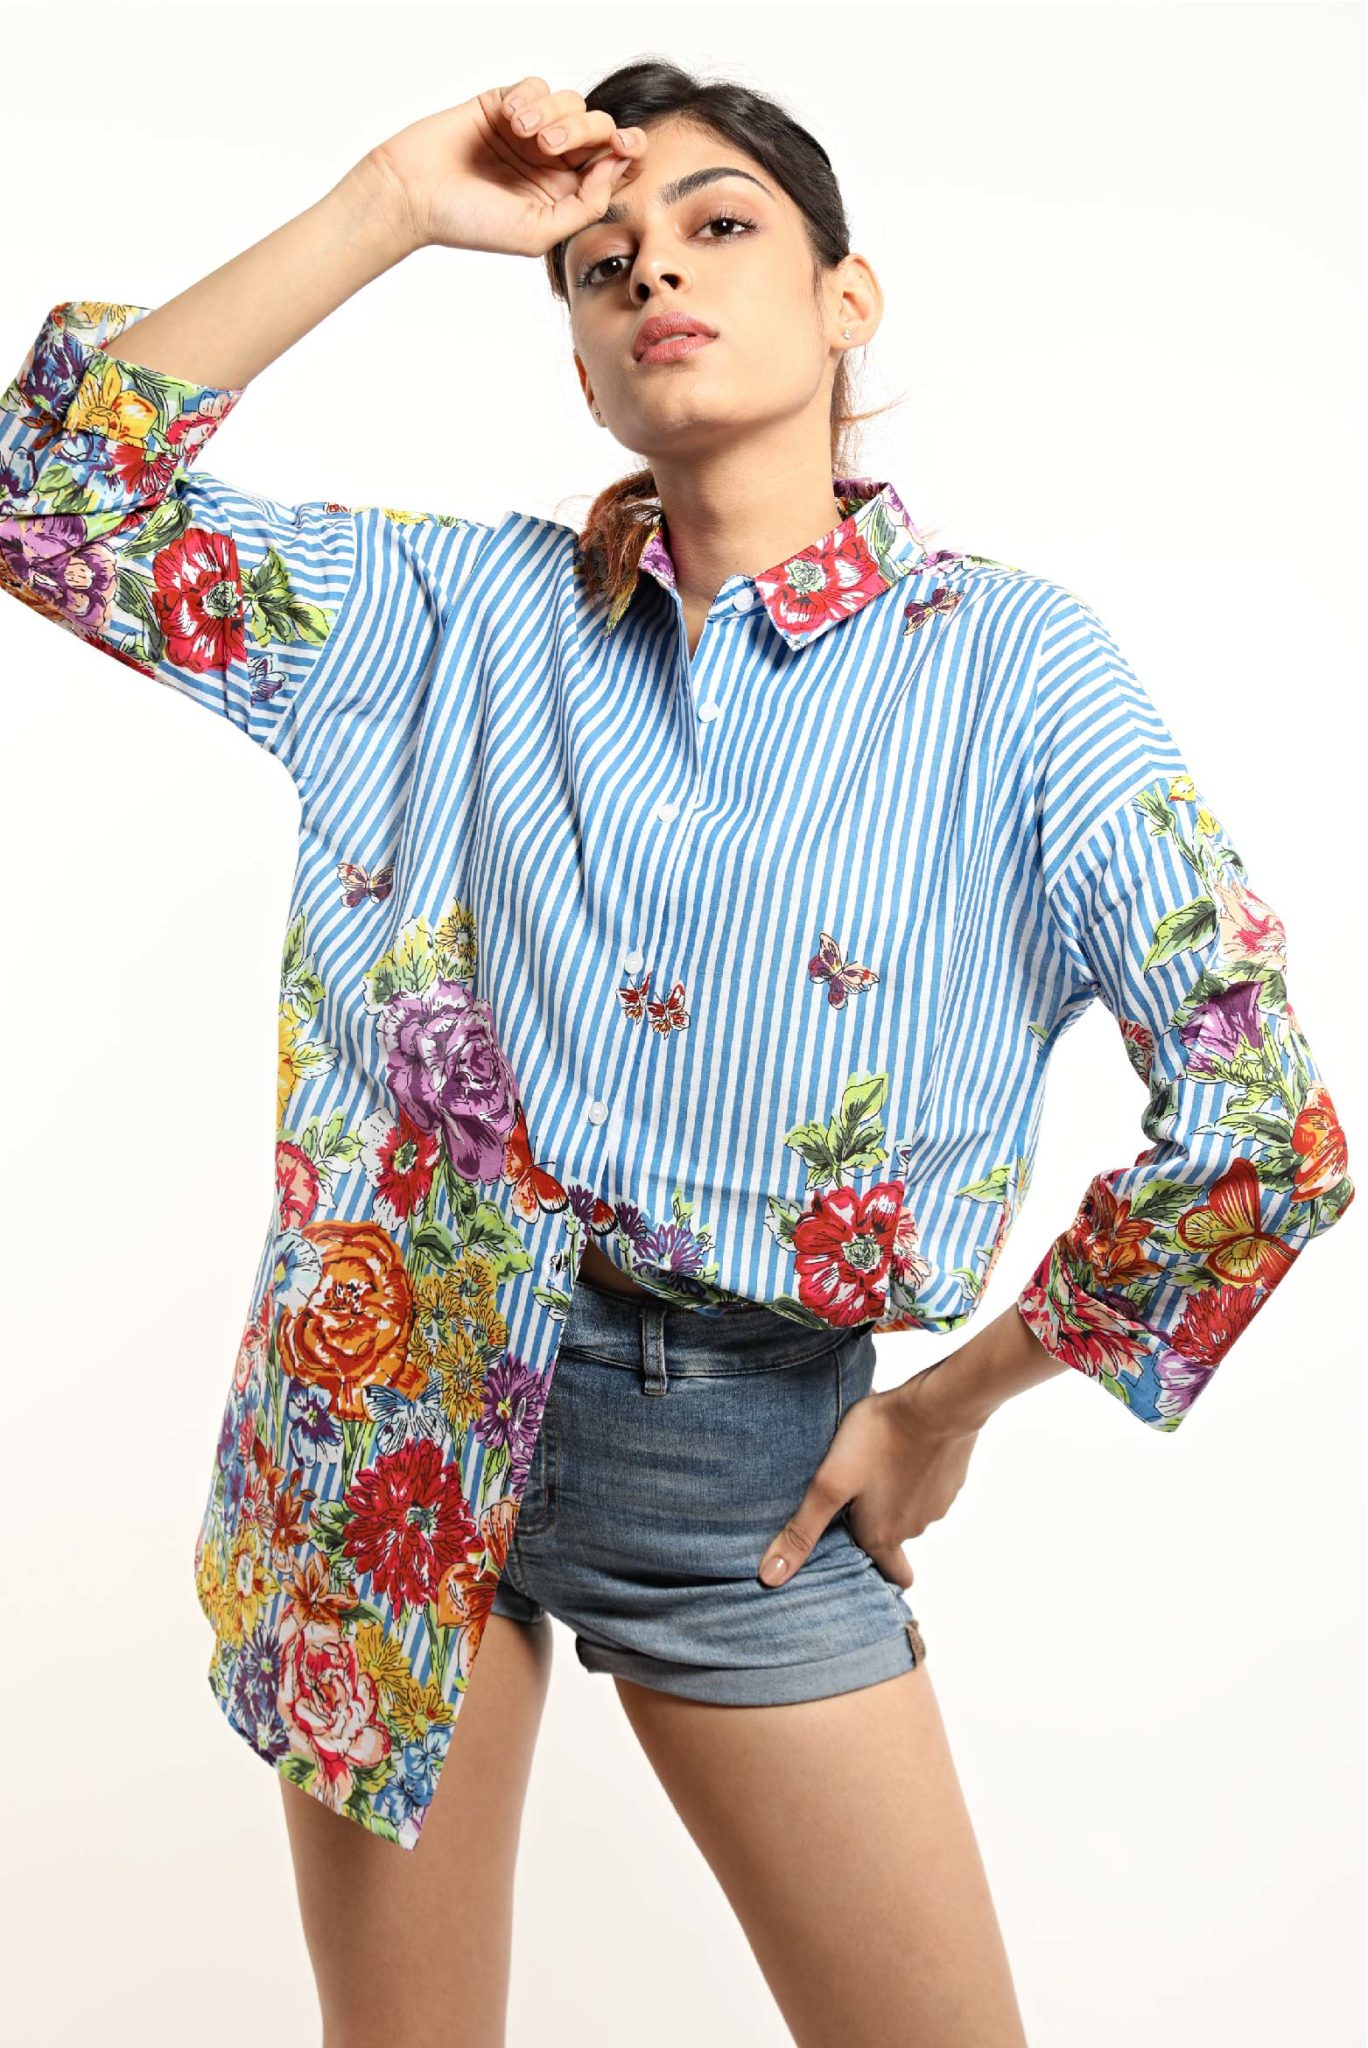 Floral Stripe Printed Shirt - How When Wear